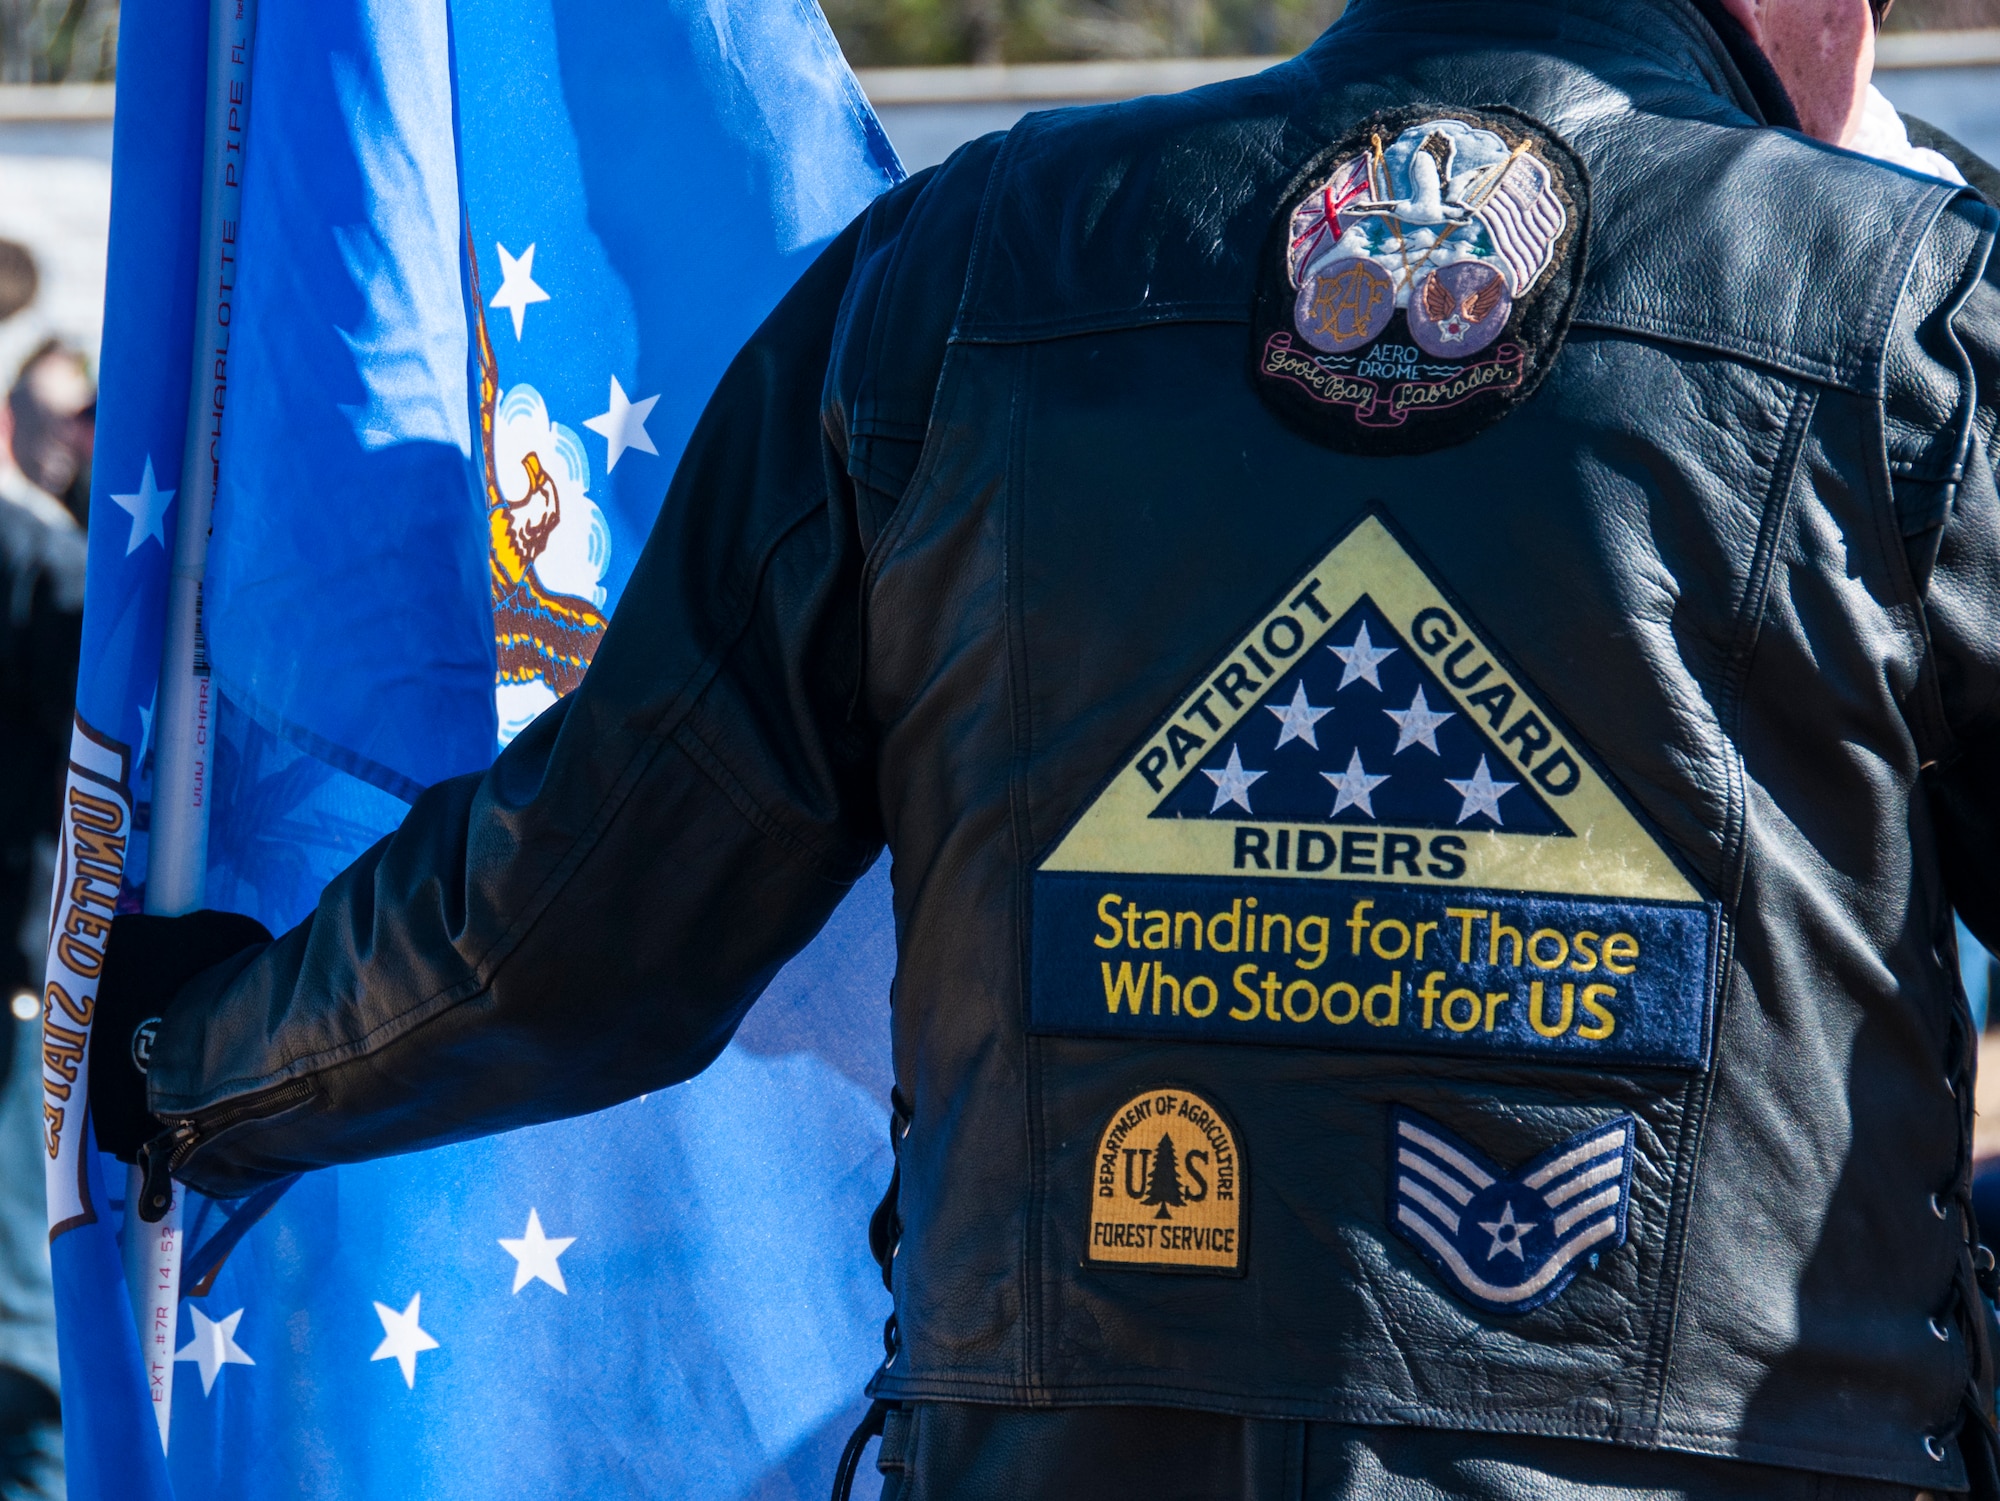 A member of the Patriot Guard Riders stands in formation for the Wreaths Across America ceremony at Georgia National Cemetery Dec. 13, 2014. The Patriot Guard Riders is an organization based in the United States whose members attend the funerals of members of the U.S. military, firefighters and police at the invitation of a decedent's family. (U.S. Air Force photo/Senior Airman Daniel Phelps)
